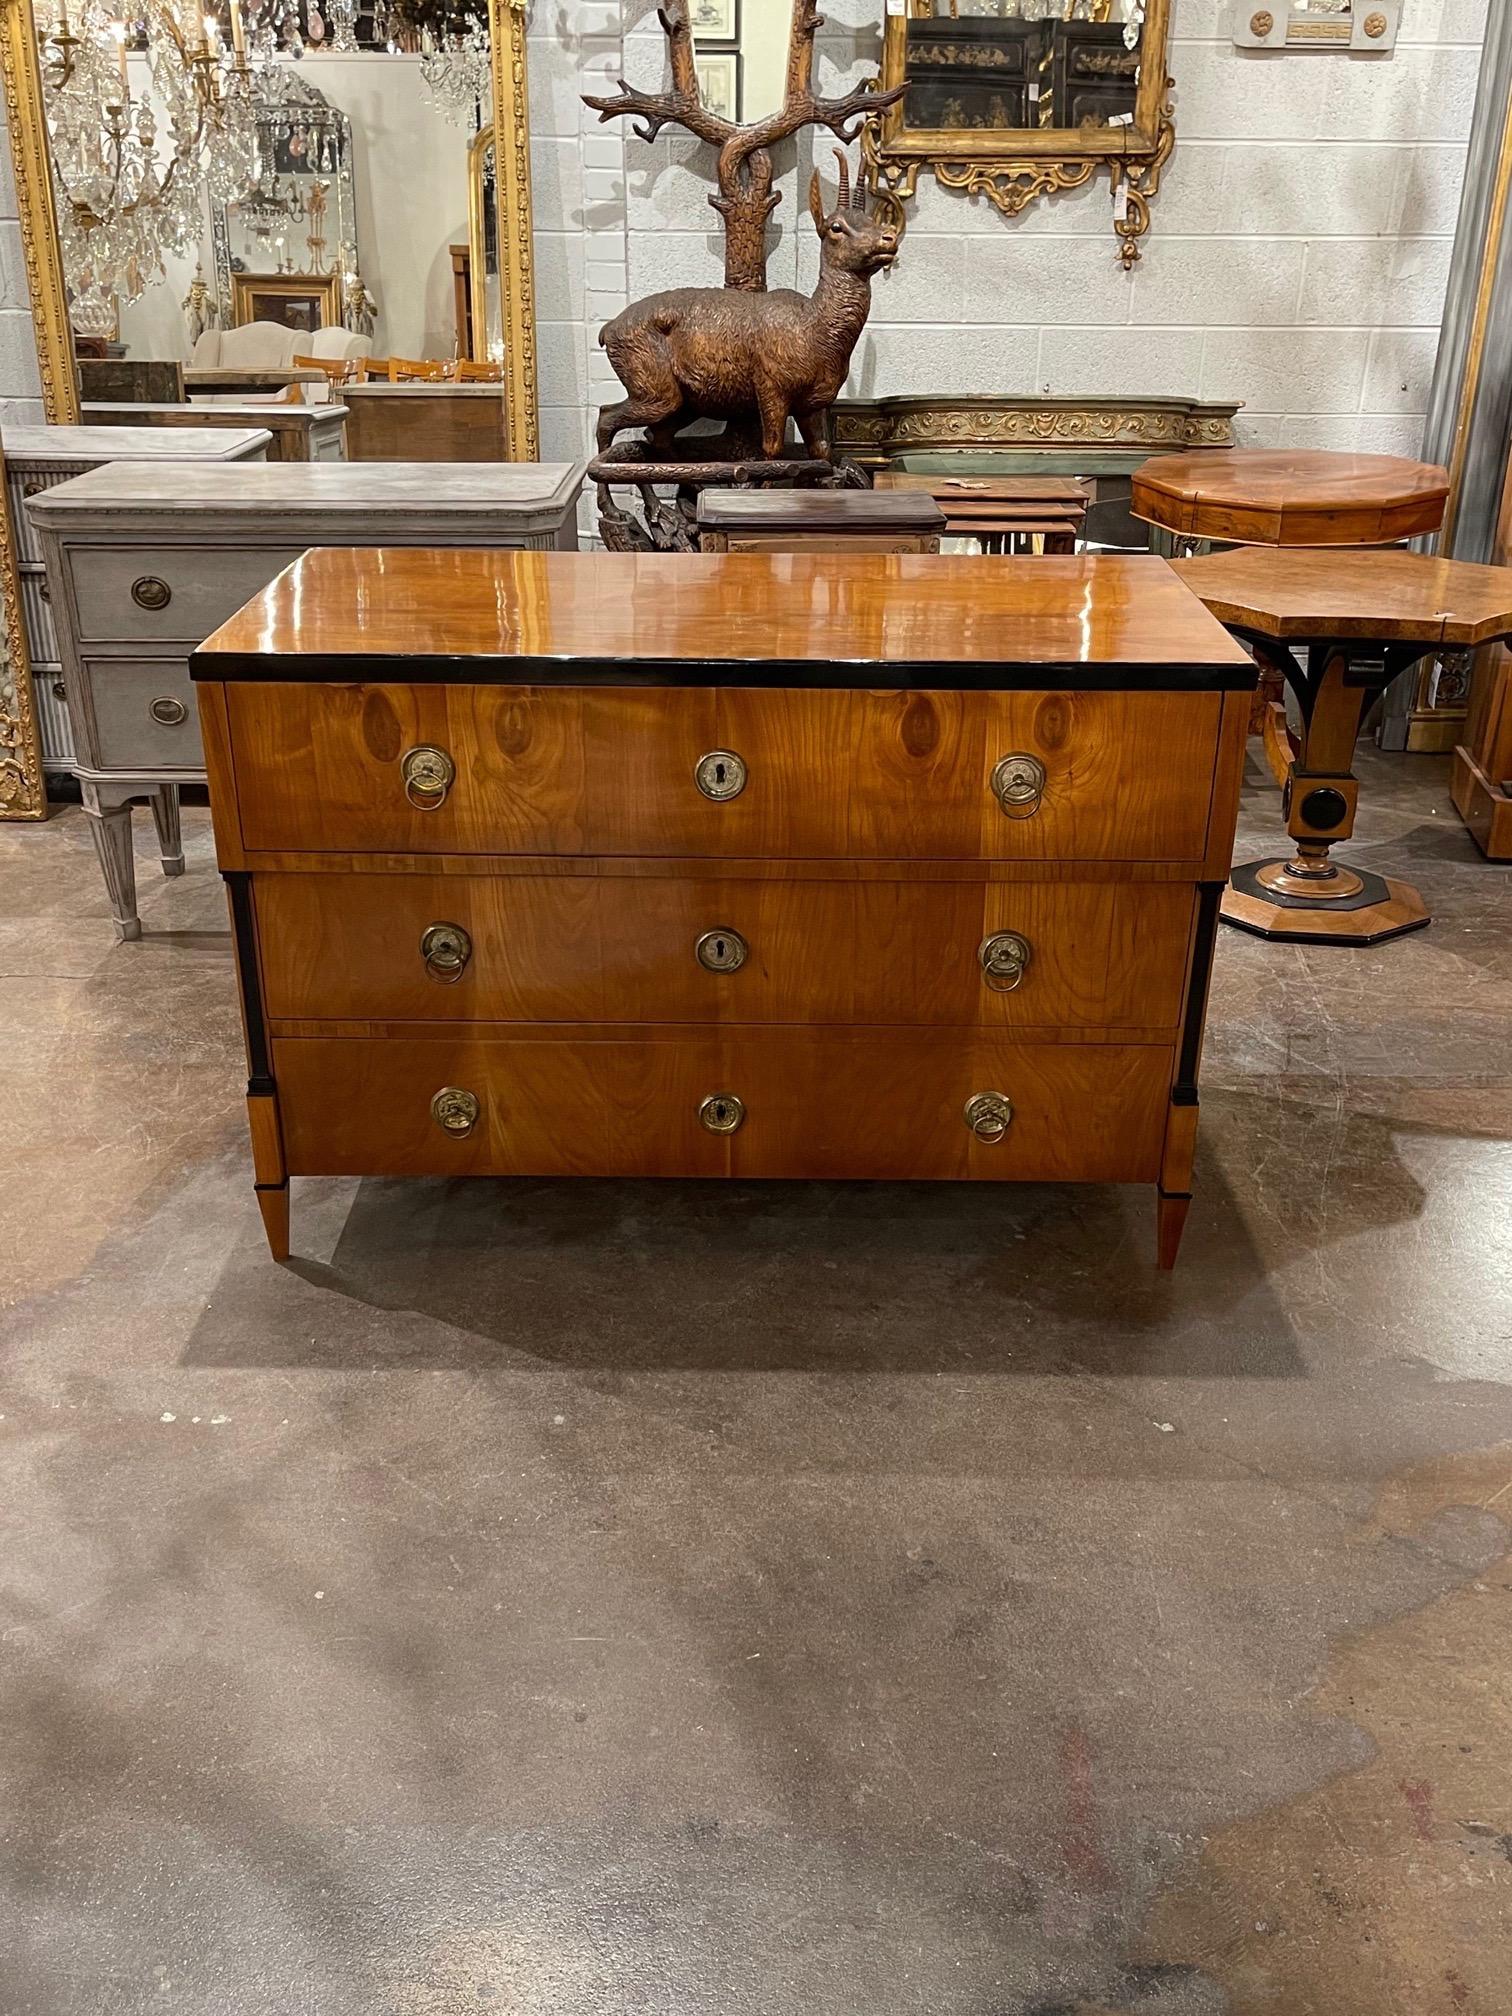 Exceptional period Austrian Biedermeier cherrywood and ebonized commode. Beautiful finish on this piece with ample storage as well. Creates a very high end look!